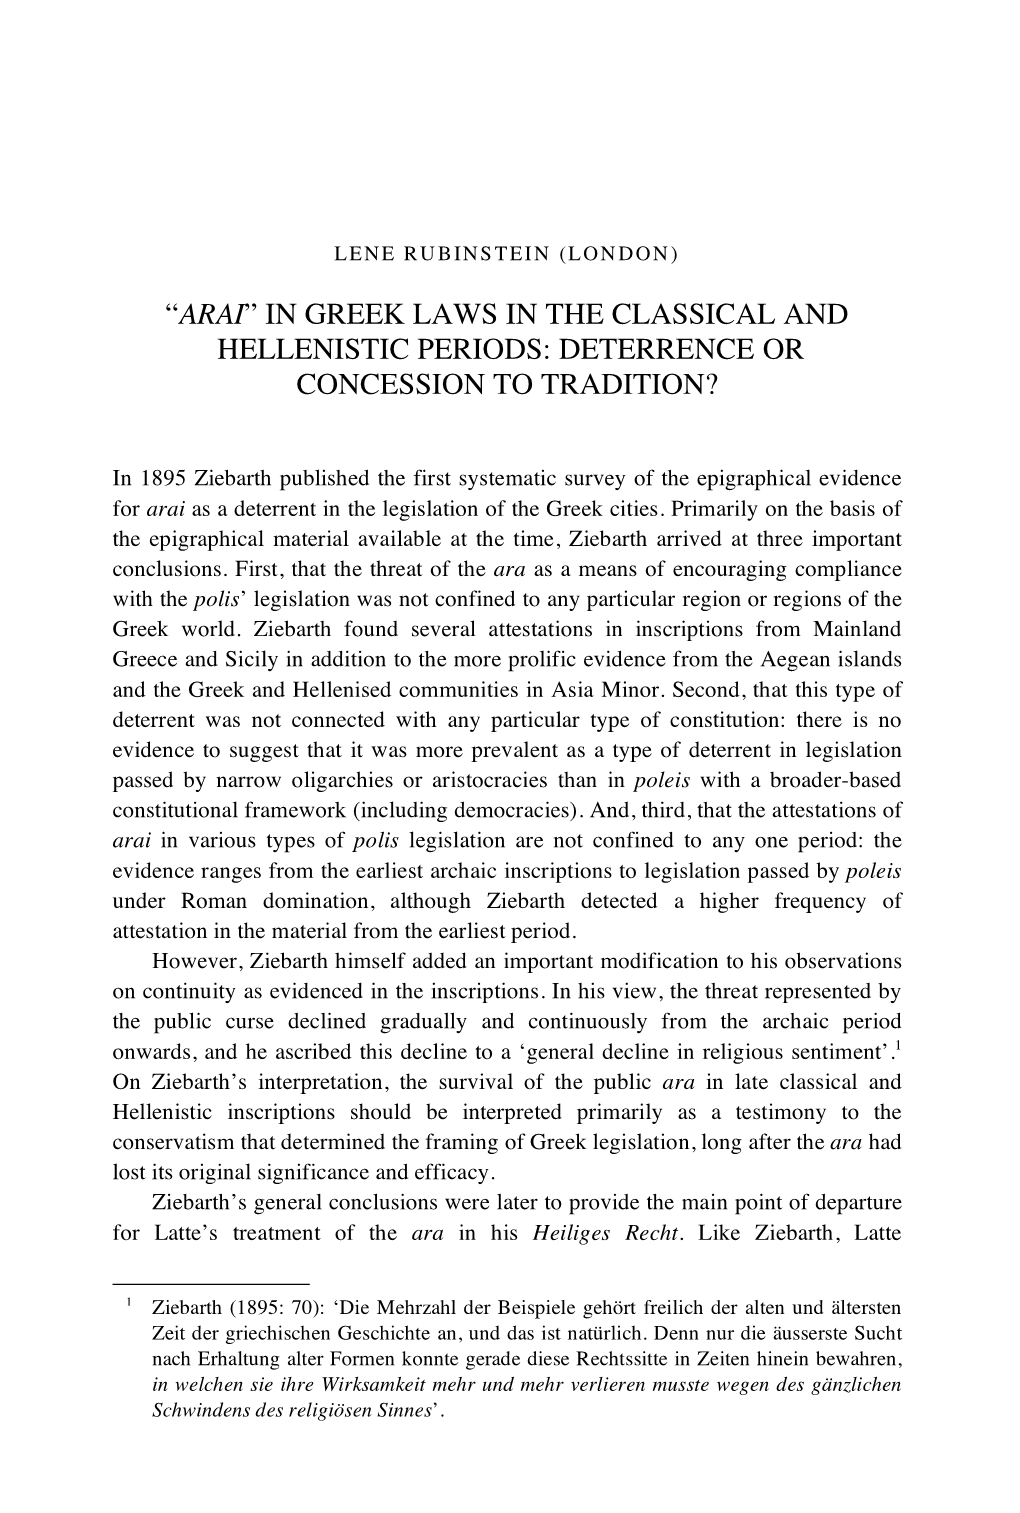 “Arai” in Greek Laws in the Classical and Hellenistic Periods: Deterrence Or Concession to Tradition?